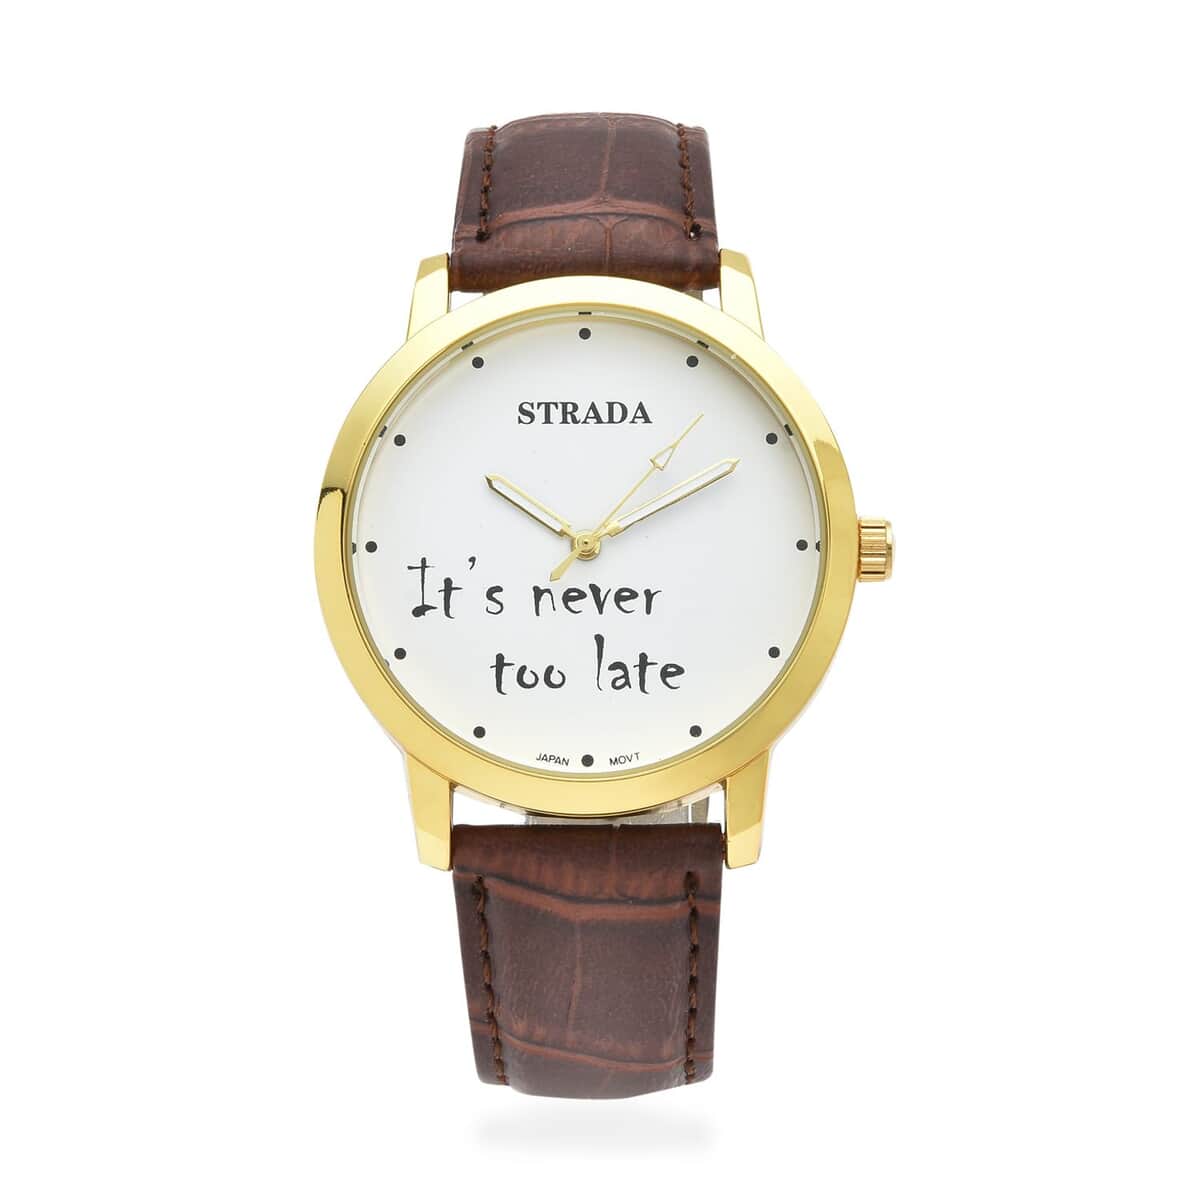 STRADA Japanese Movement Whatever I'm late anyway Dial Watch with Brown Faux Leather Strap (40.38mm) (7.5-9.0 Inch) image number 0